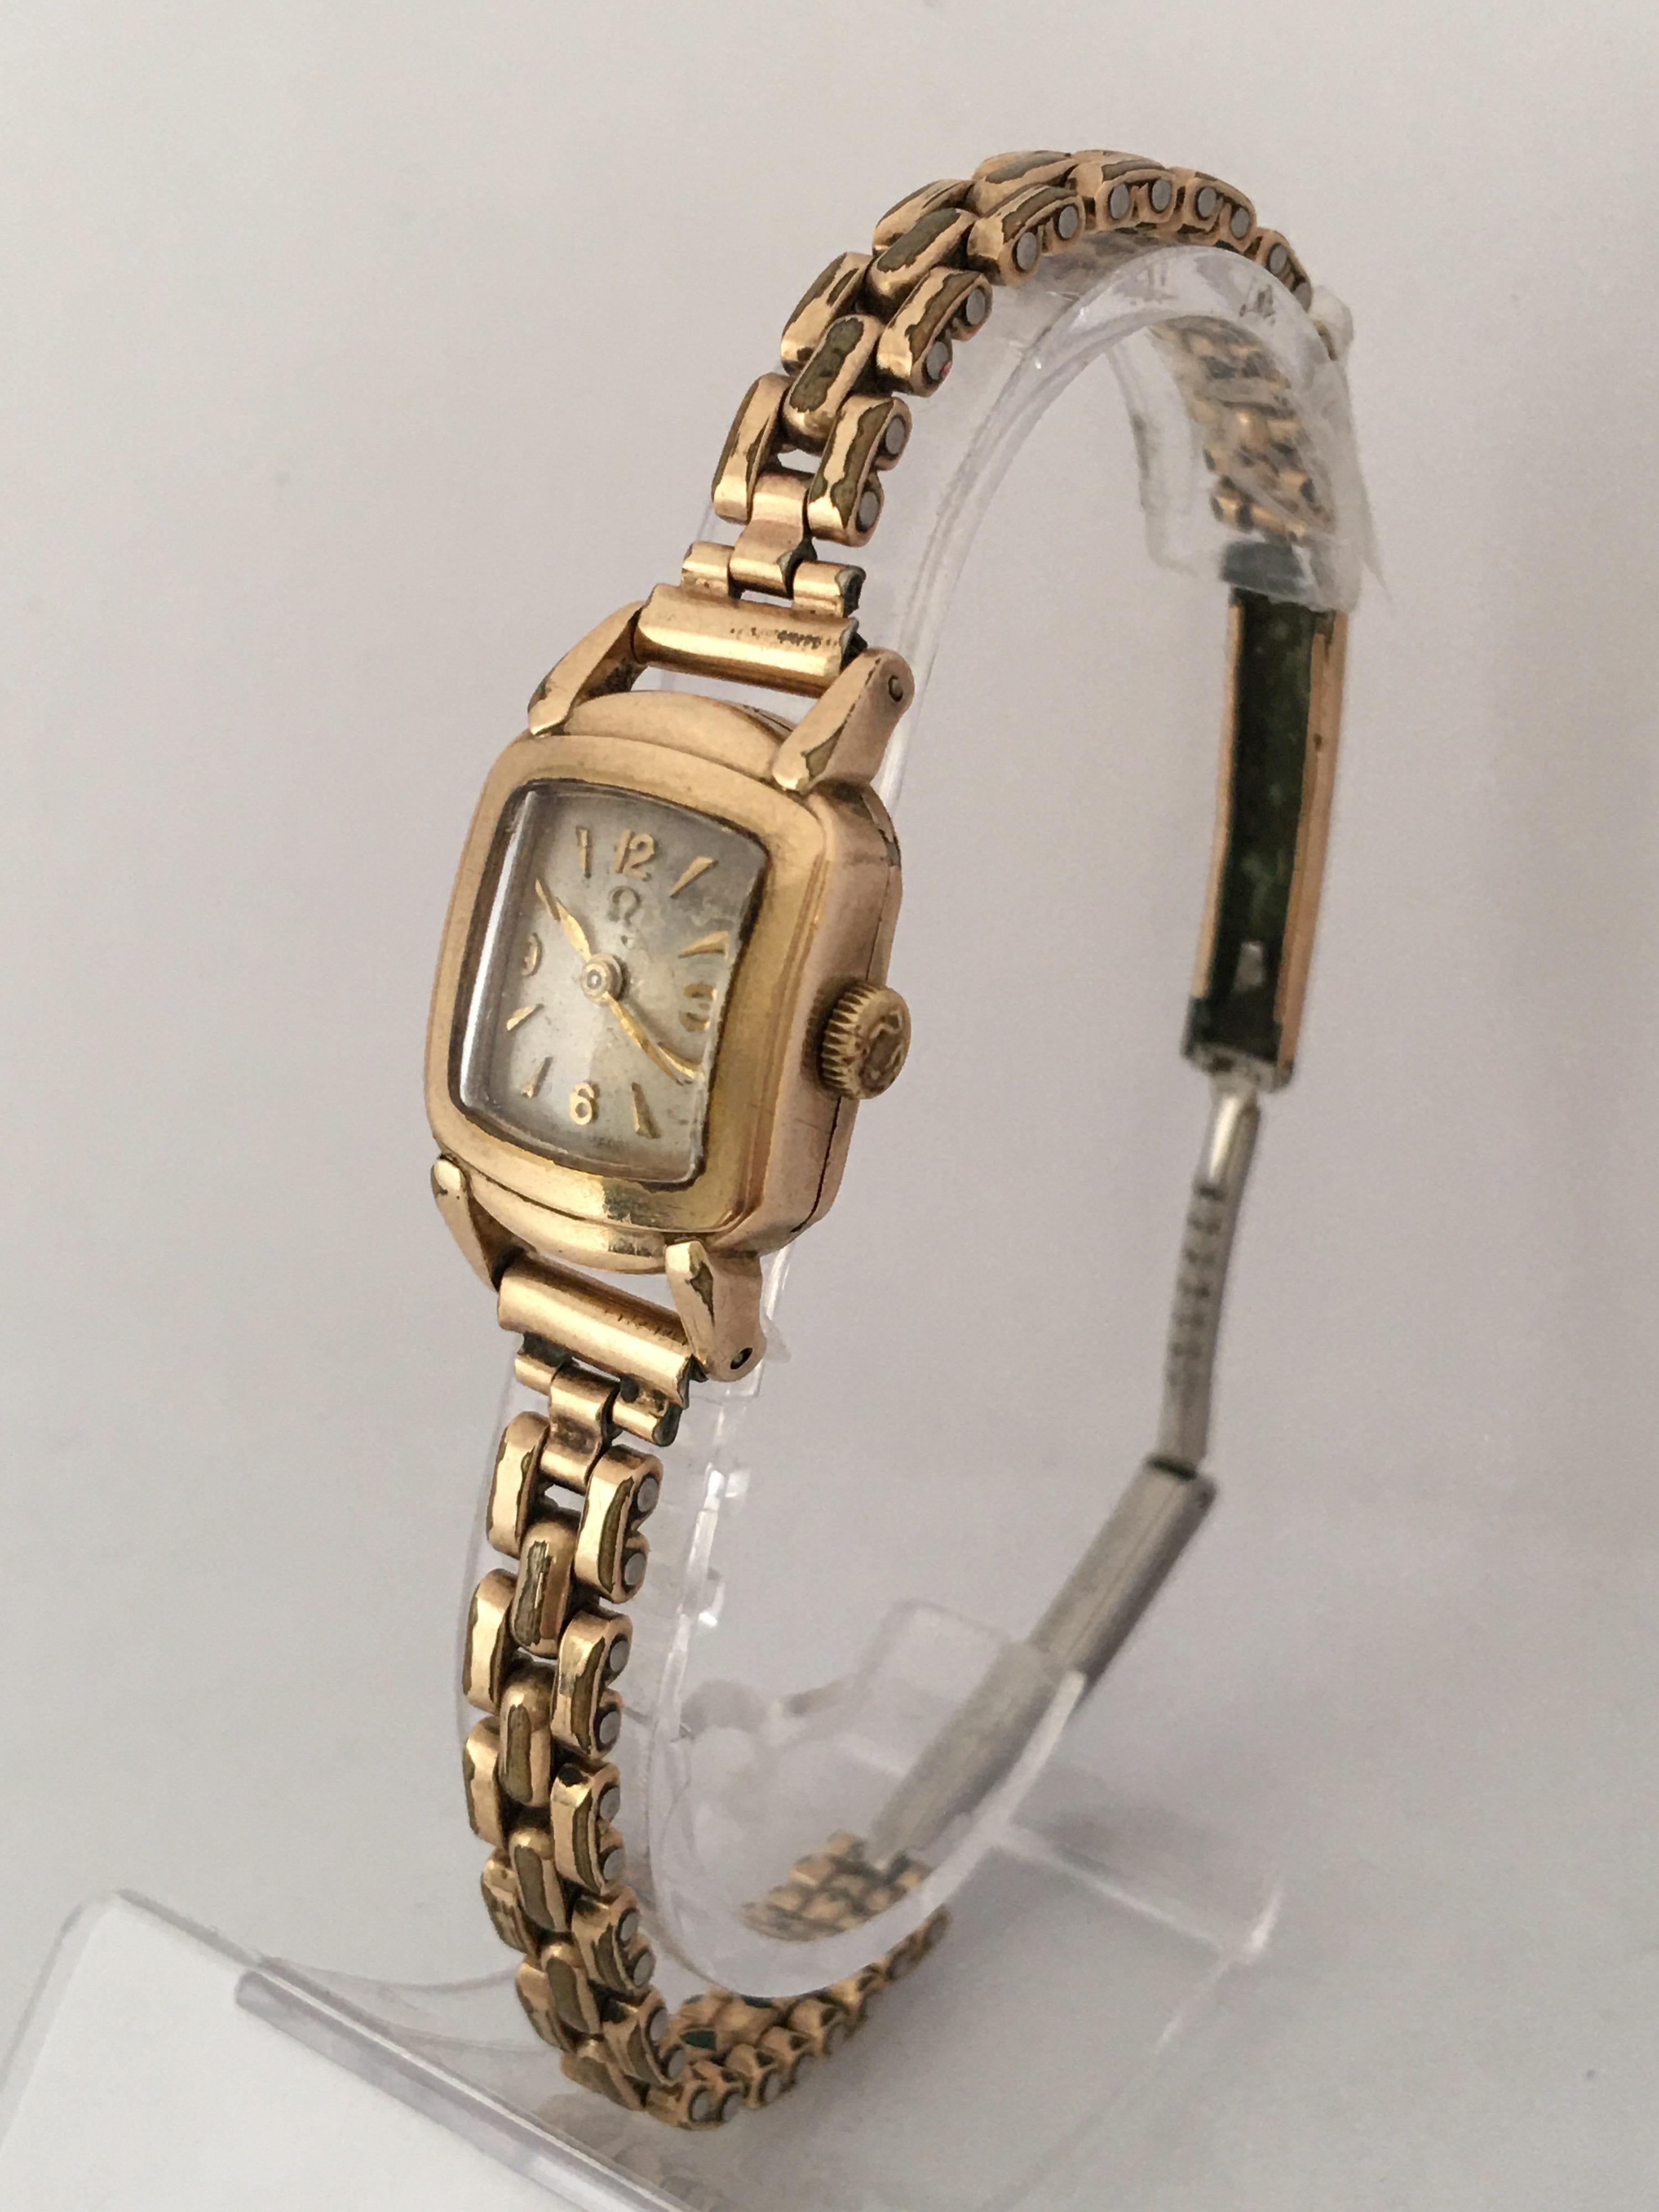 Ladies Omega Vintage Gold-Plated Mechanical Watch For Sale 1